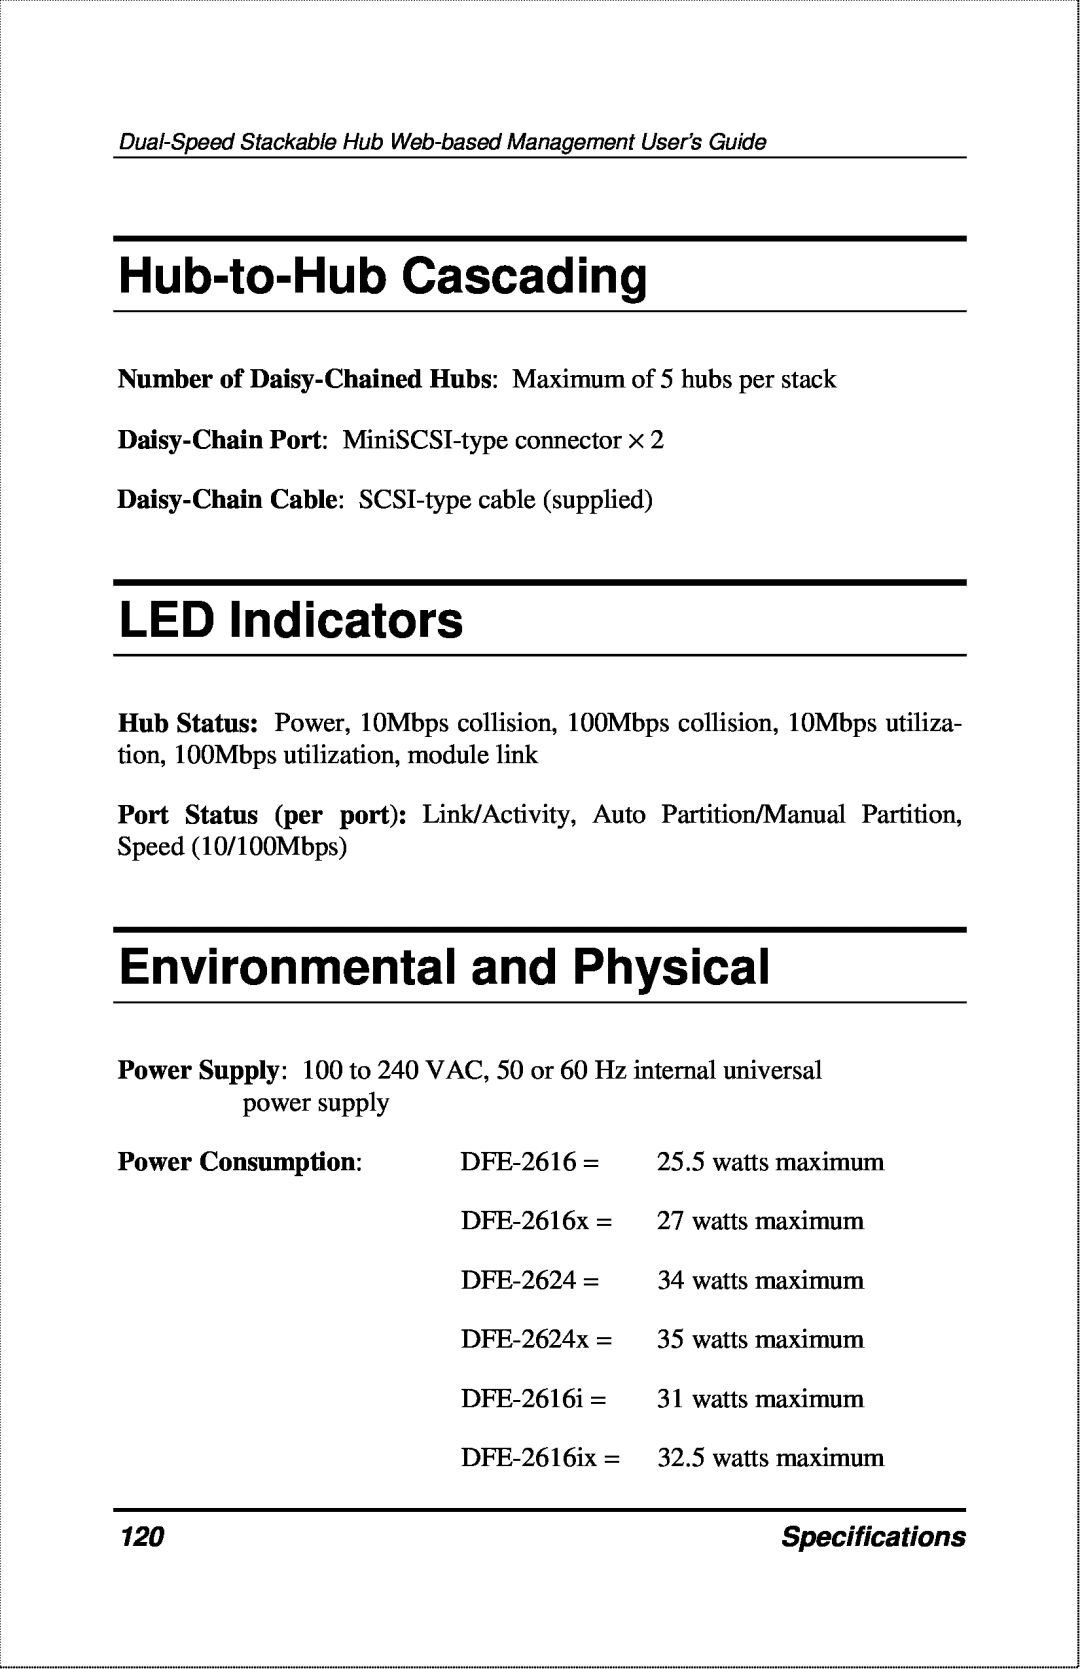 D-Link DFE-2600 manual Hub-to-Hub Cascading, LED Indicators, Environmental and Physical, Power Consumption, Specifications 